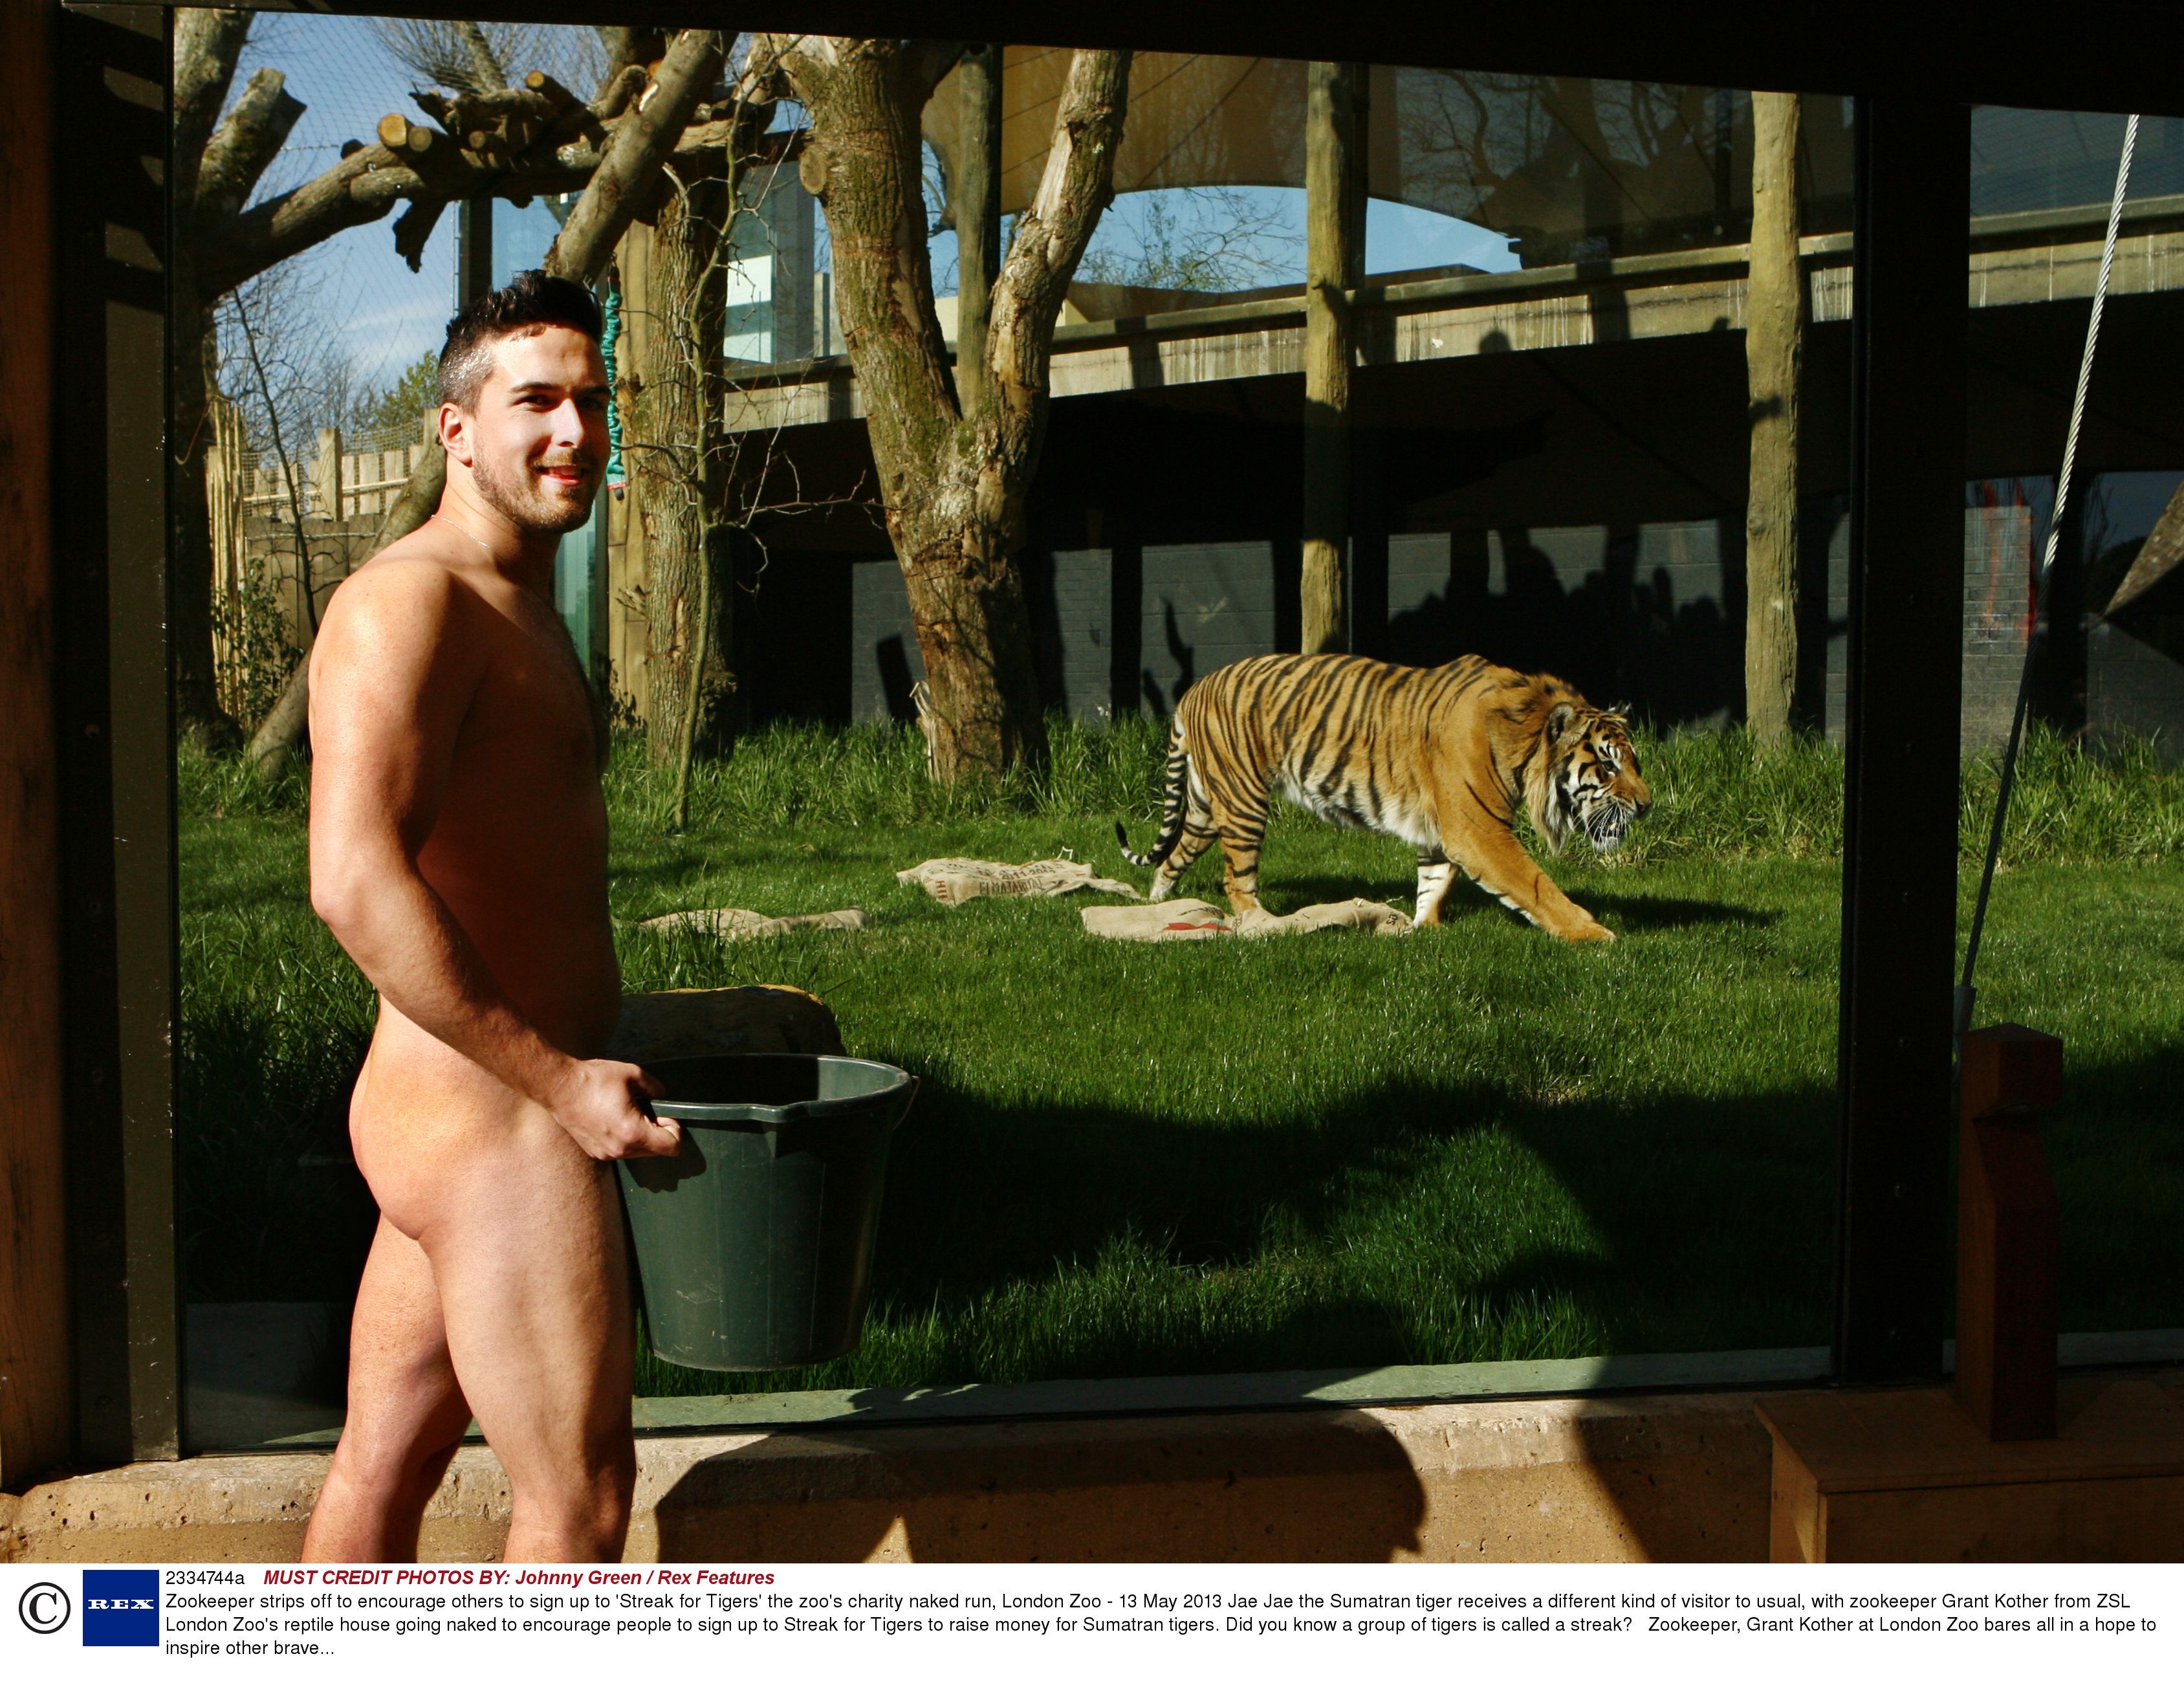 Gay Spy Zookeeper goes naked for charity